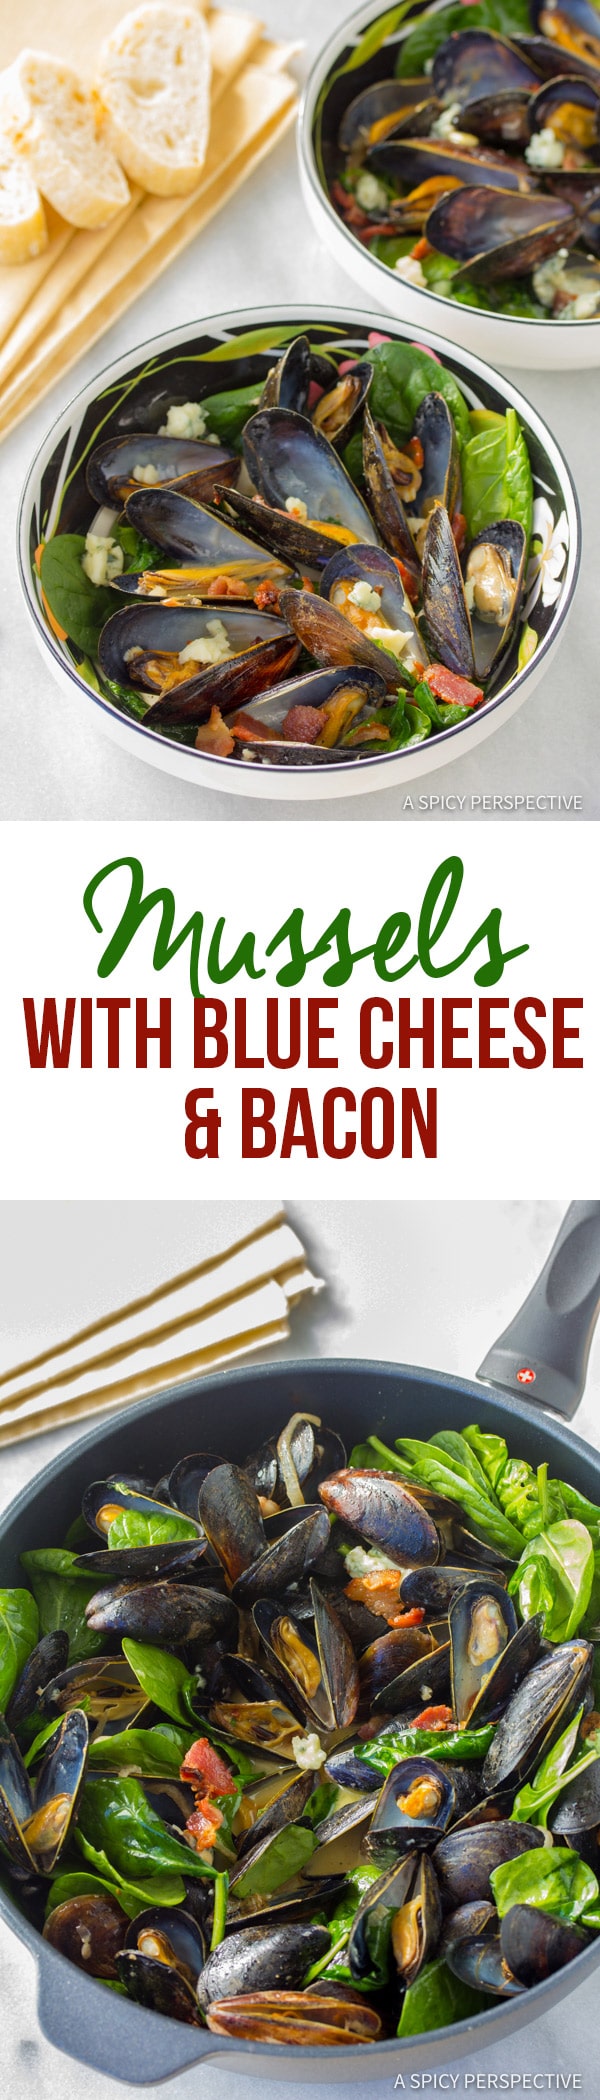 Mussels Recipe with Blue Cheese and Bacon (Moules Fromage Bleu) | ASpicyPerspective.com